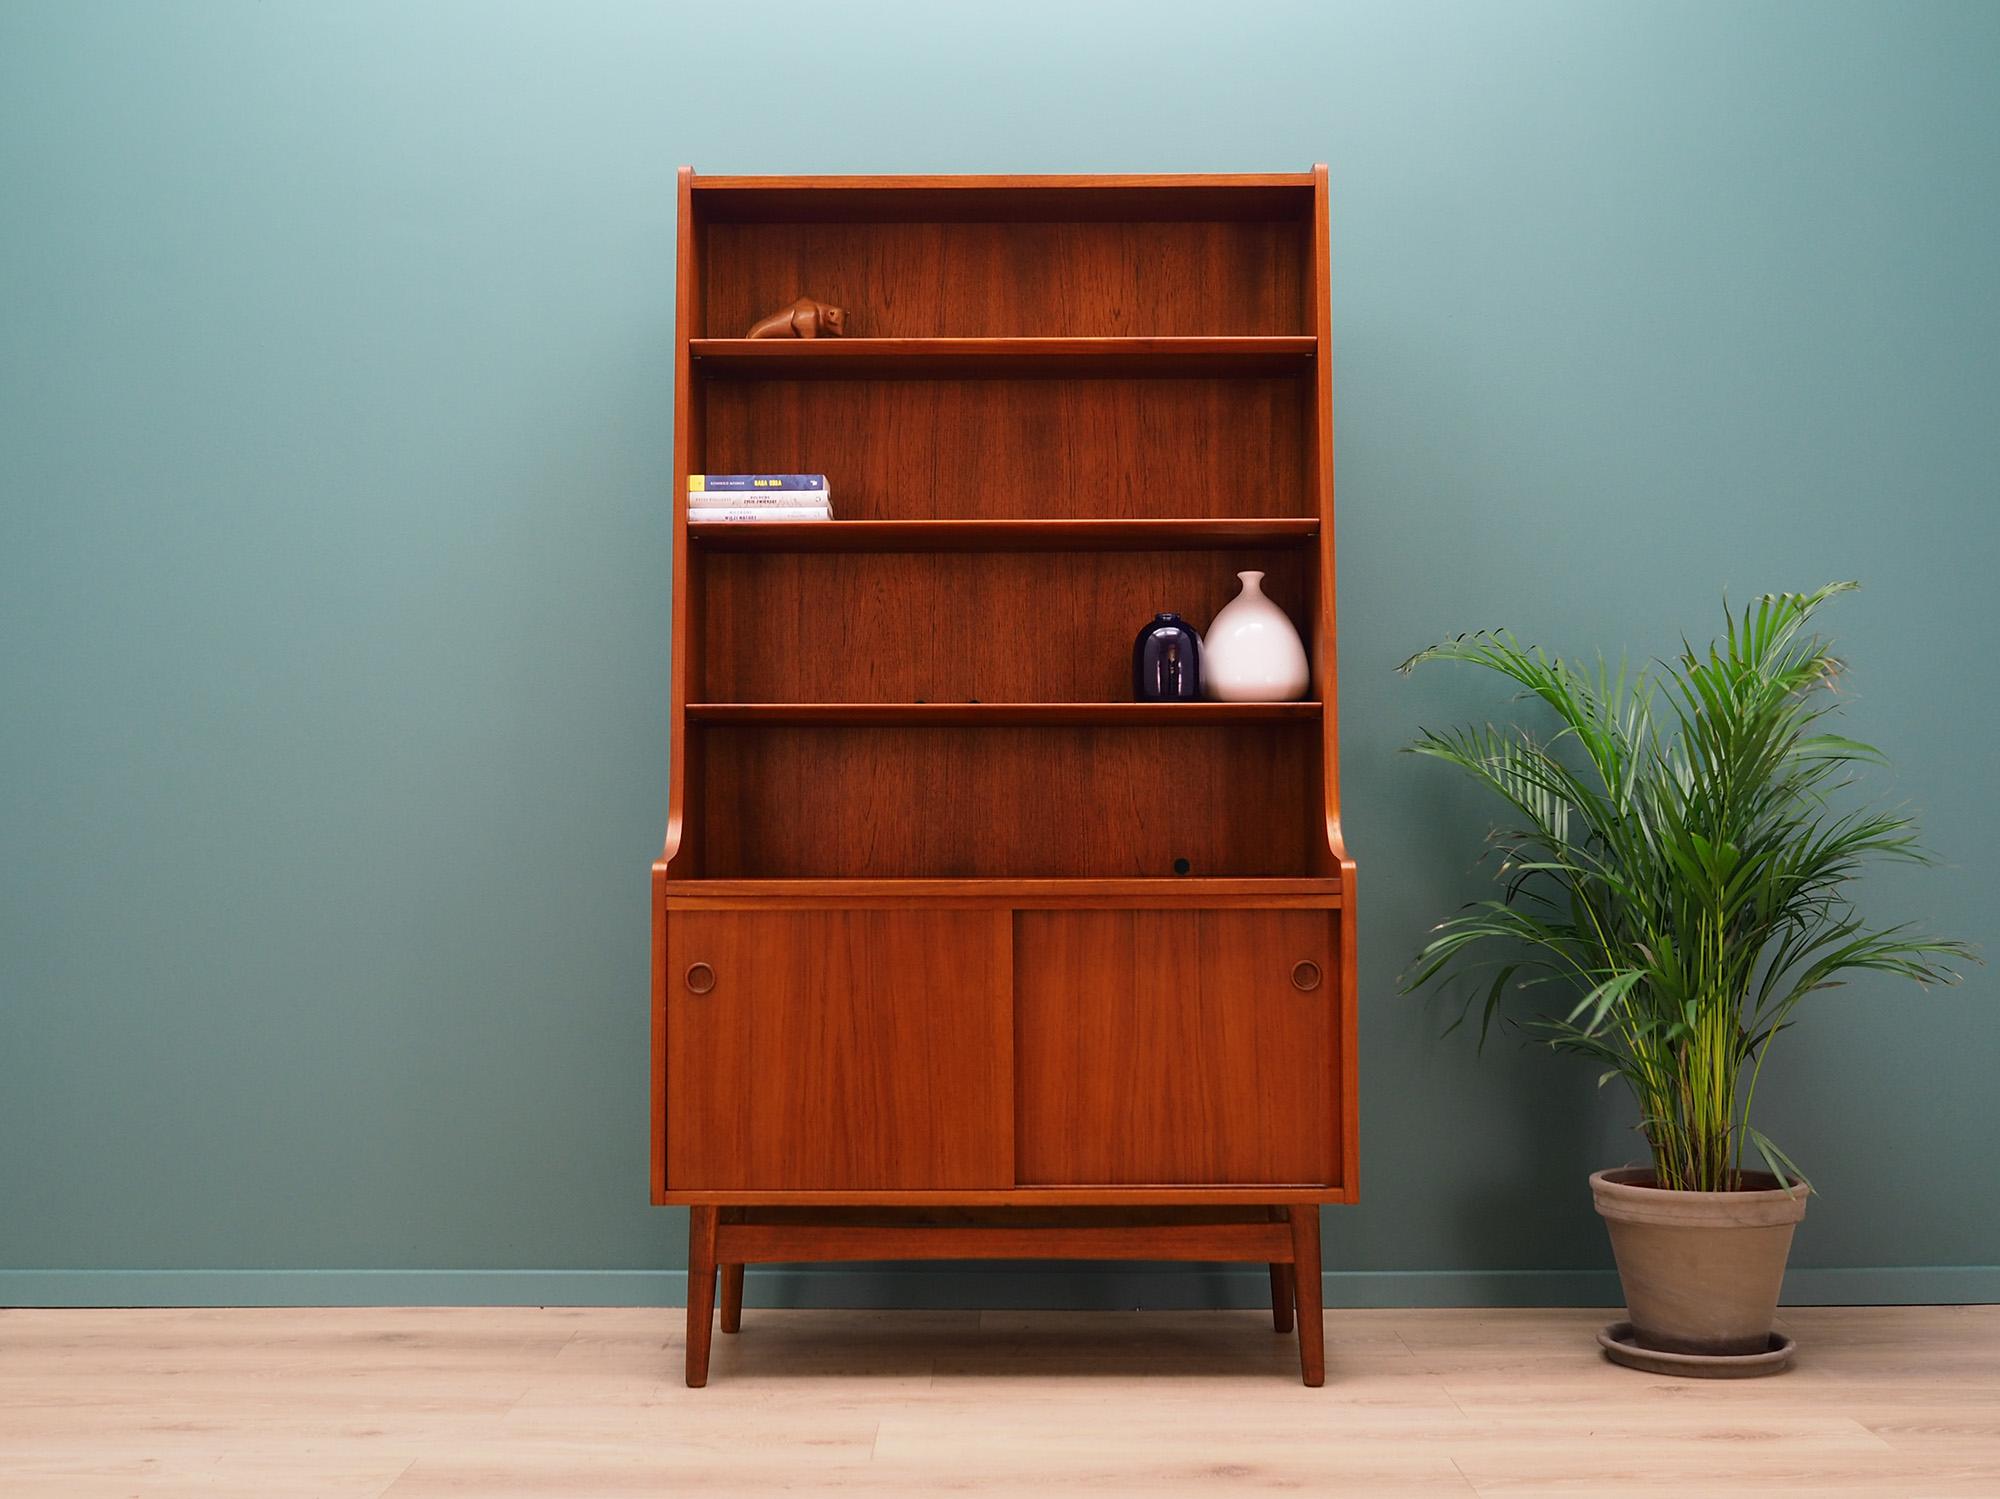 Fantastic bookcase / library from the 1960s-1970s. Danish design, Minimalist form. Designed by Johannes Sorth. Surface of the furniture finished with teak veneer. Shelves with height adjustment, shelf behind sliding door. Preserved in good condition